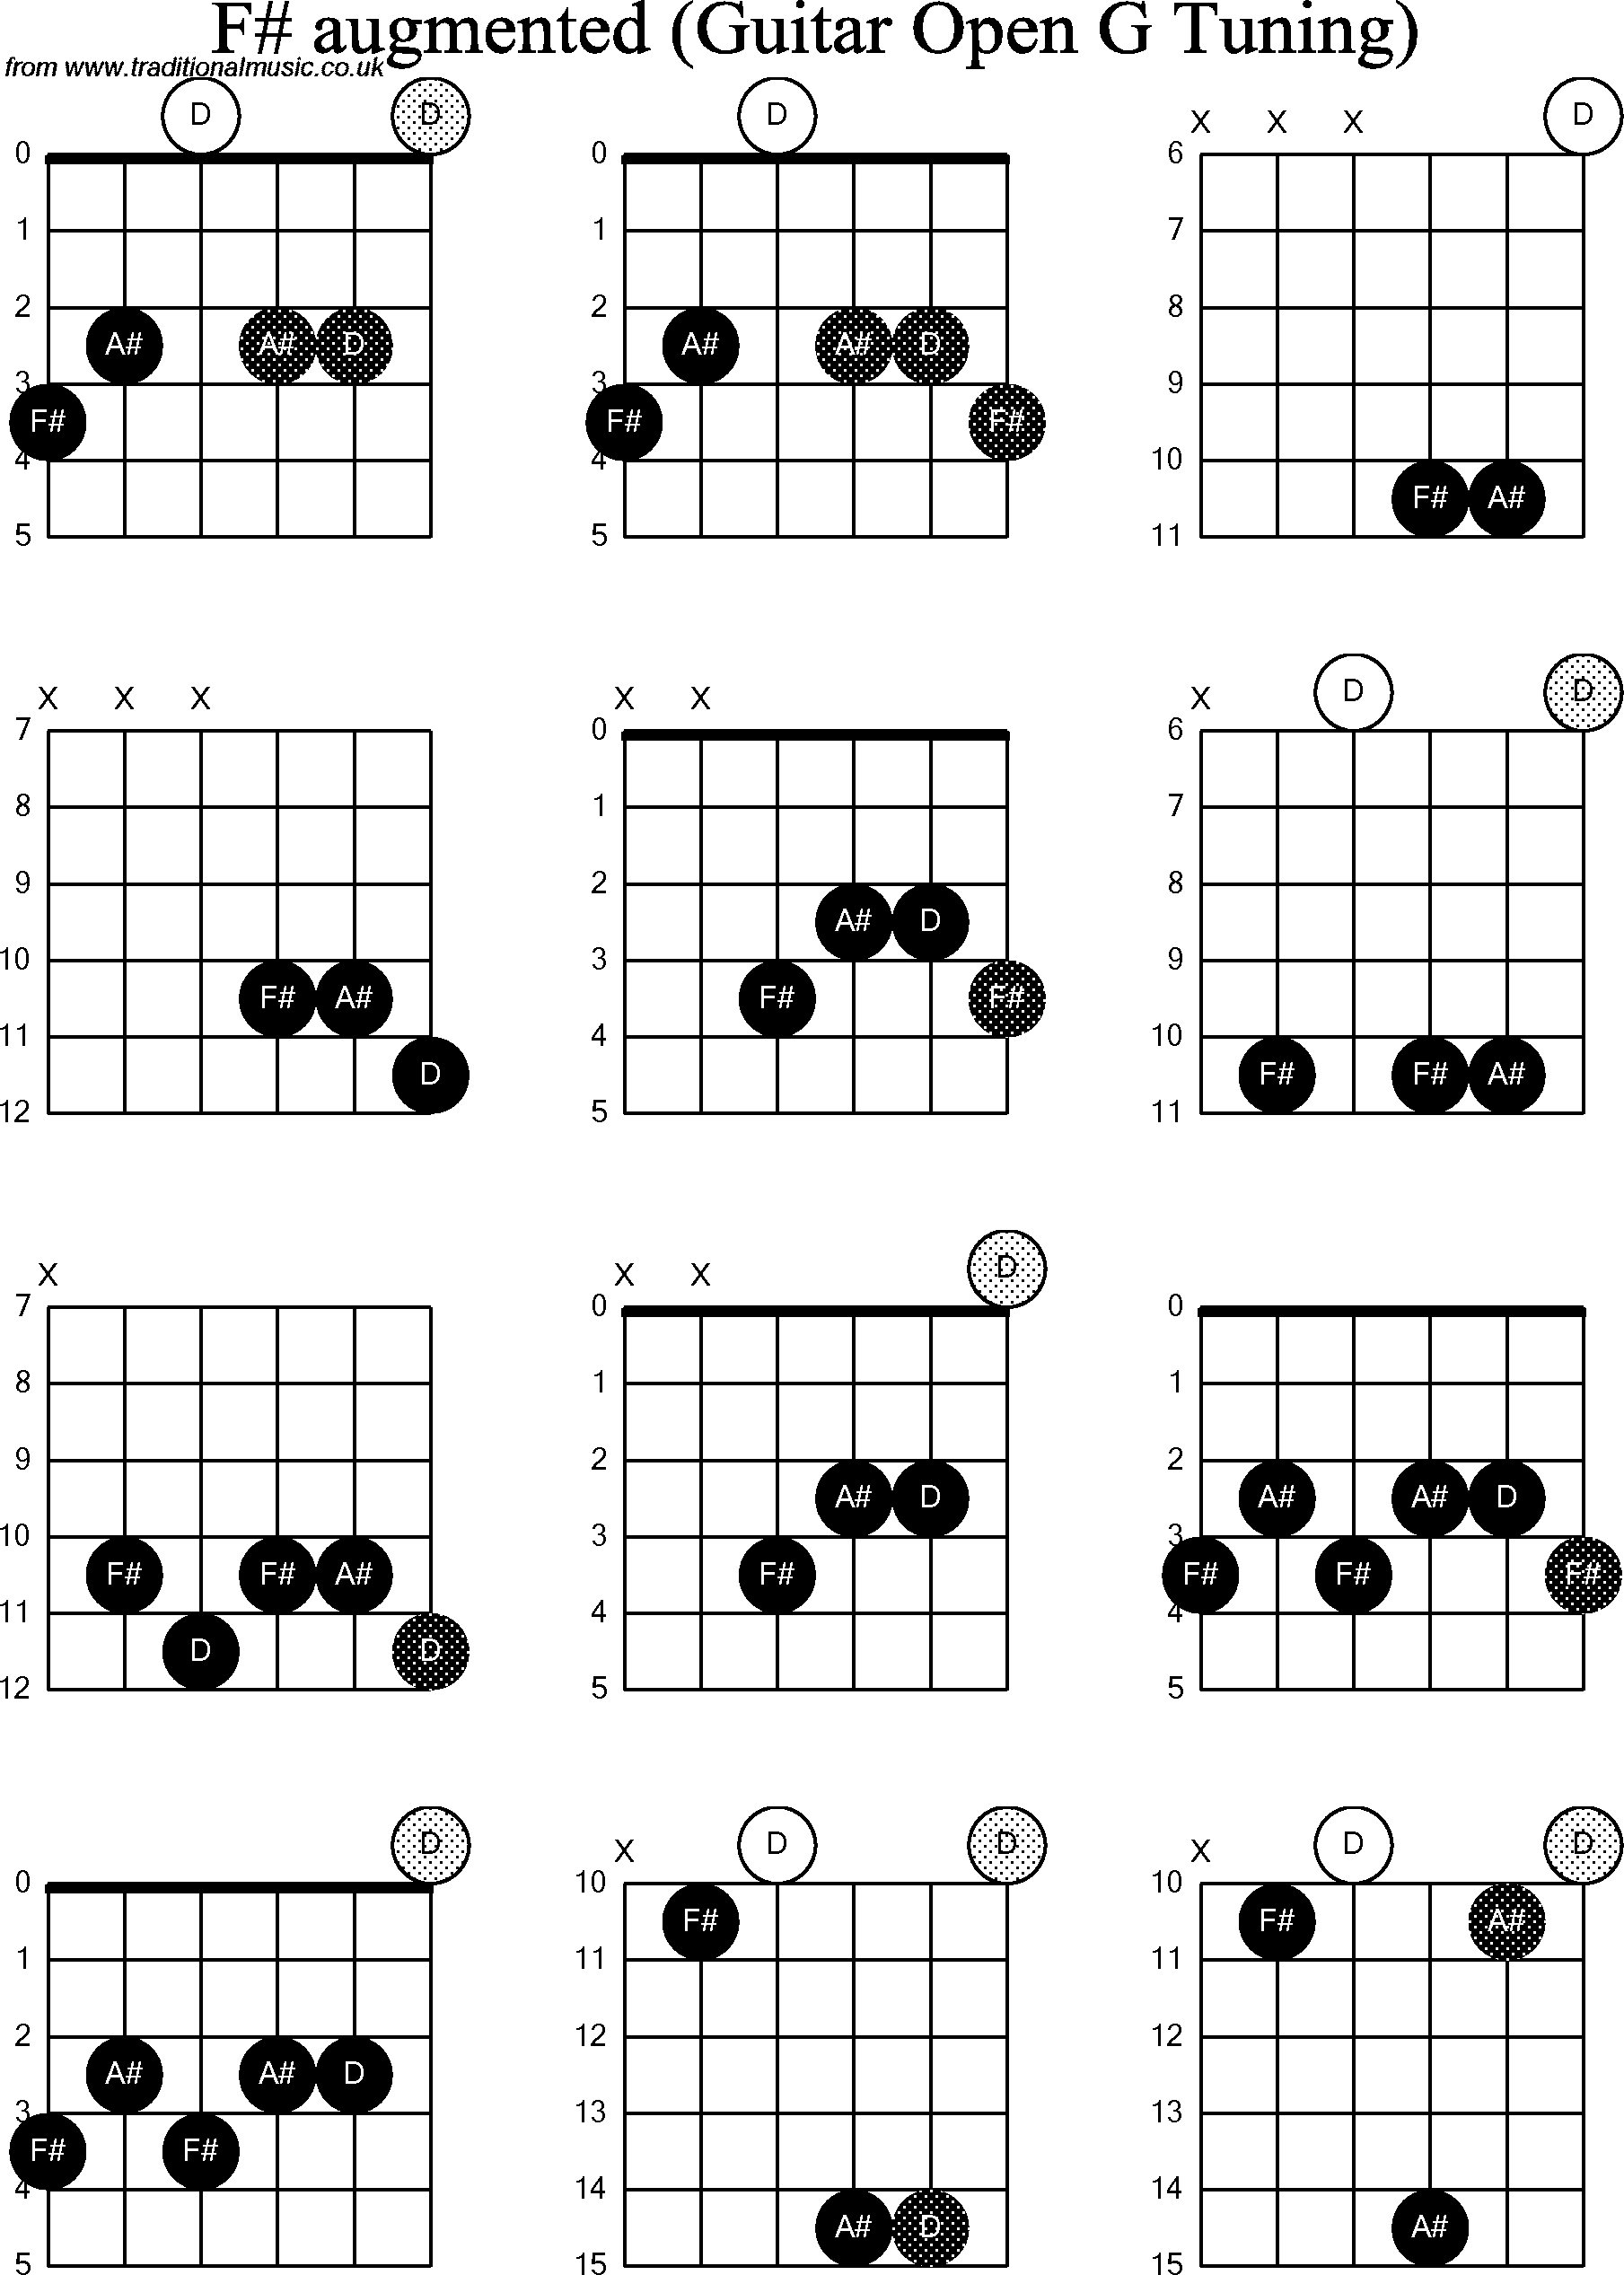 Chord diagrams for Dobro F# Augmented